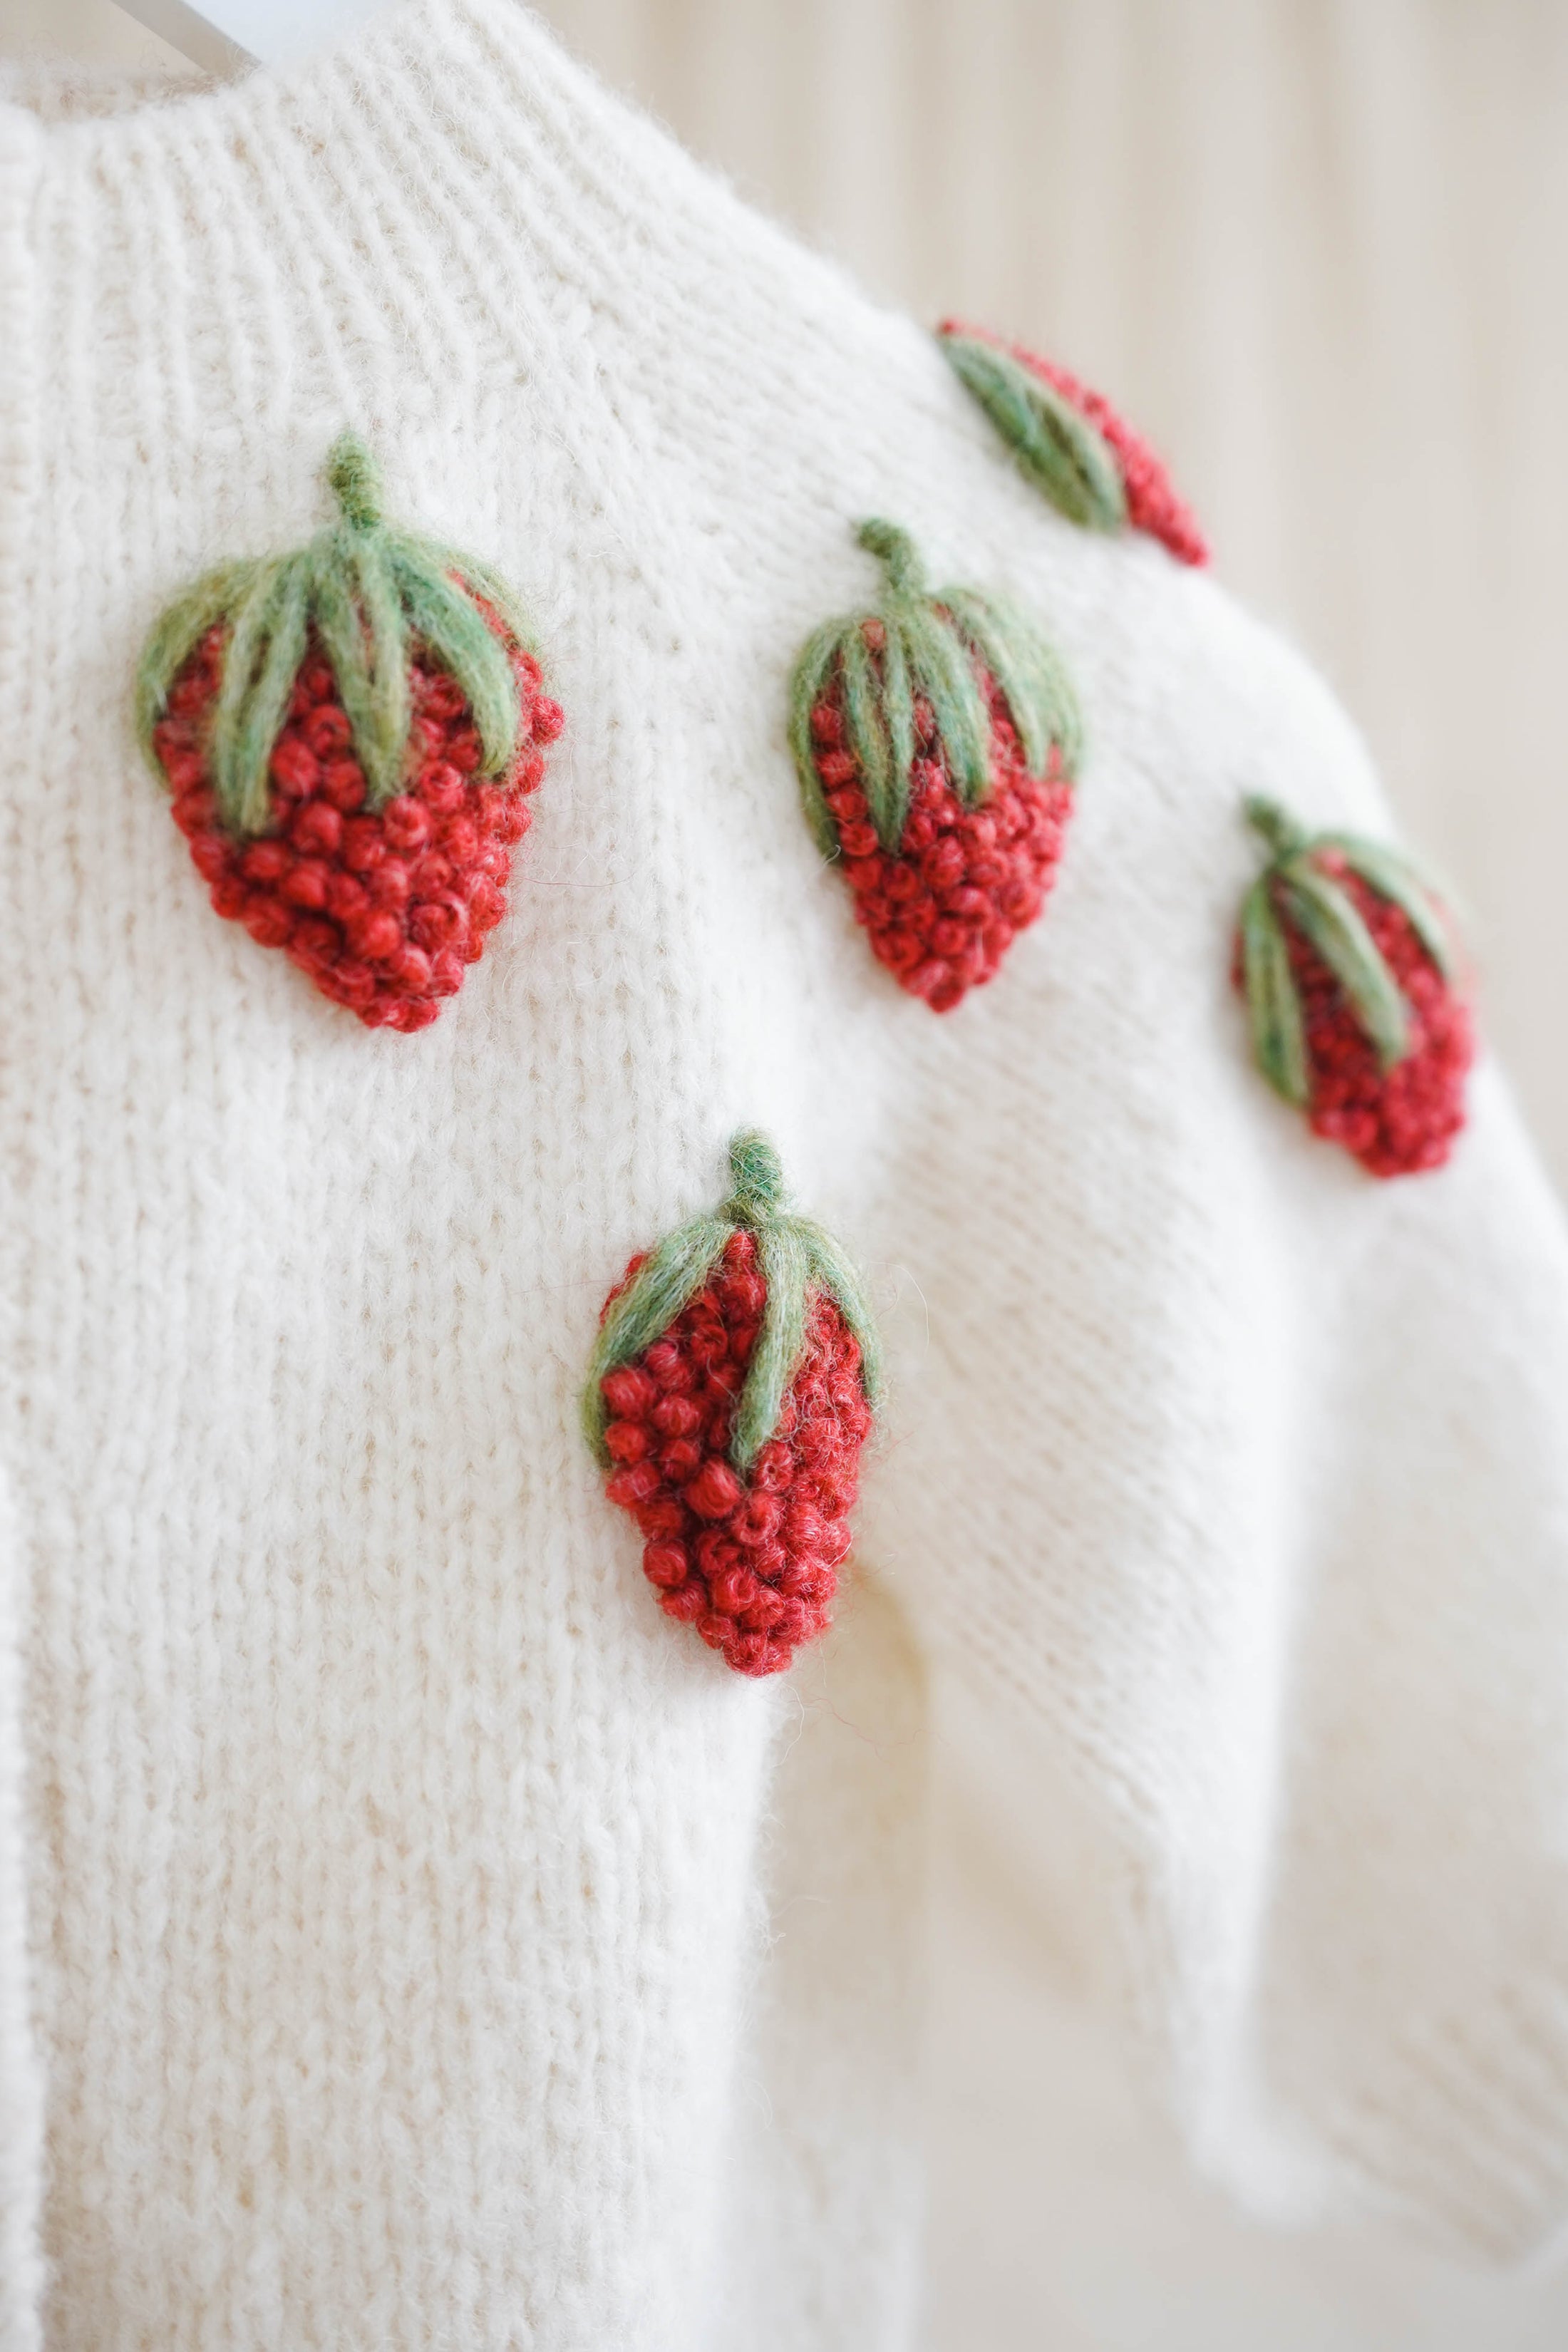 Strawberry Fields Hand-Knitted Cardigan